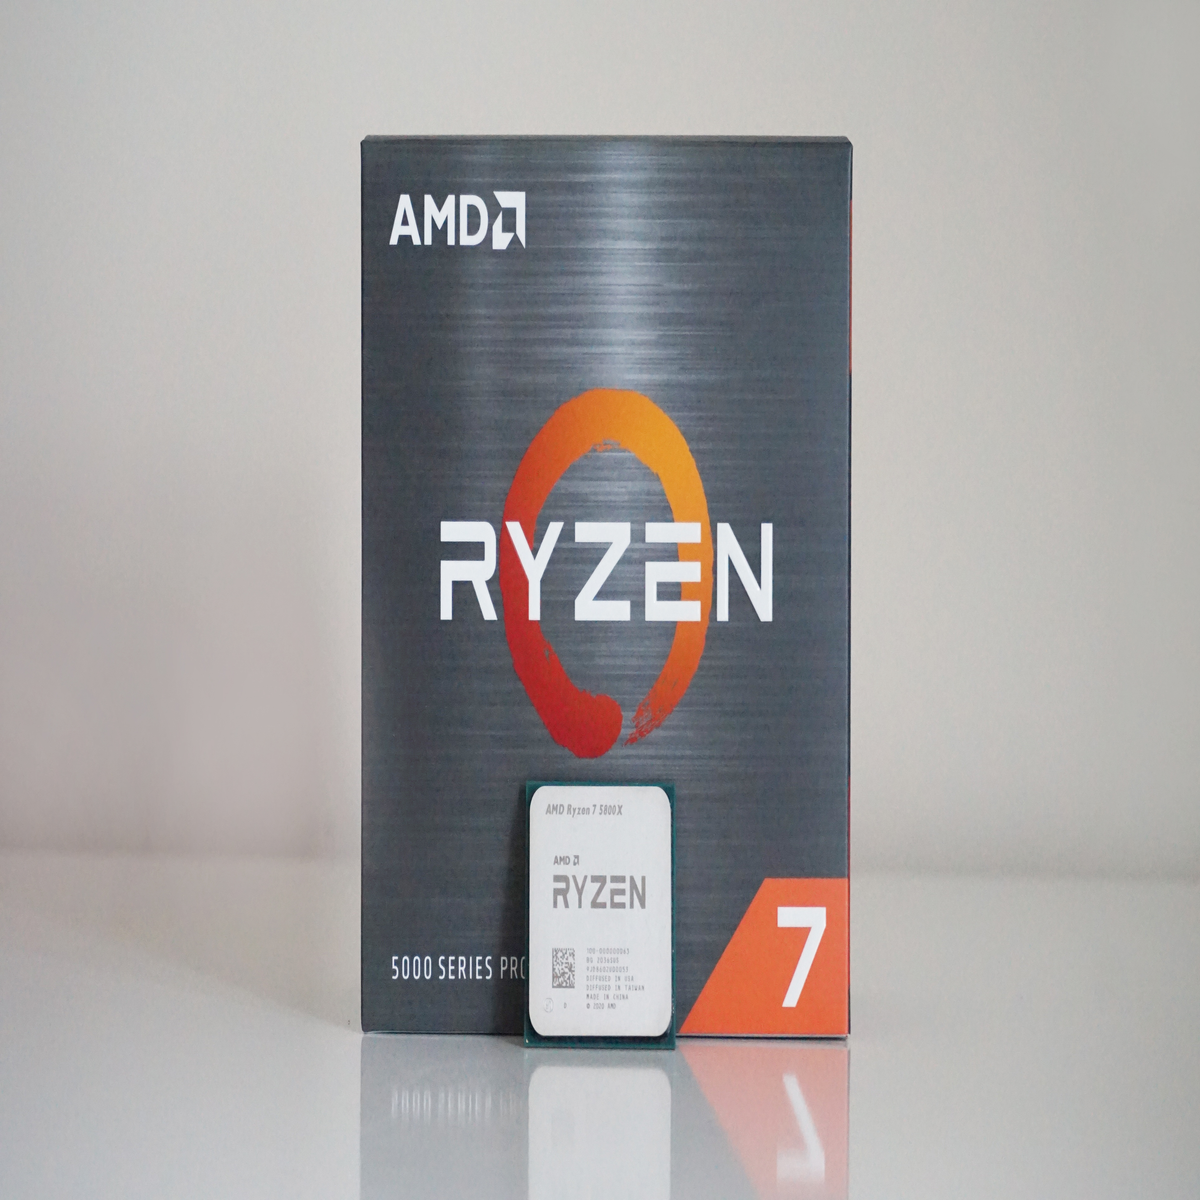 AMD Ryzen 7 5700X Review - Finally an Affordable 8-Core - Rendering